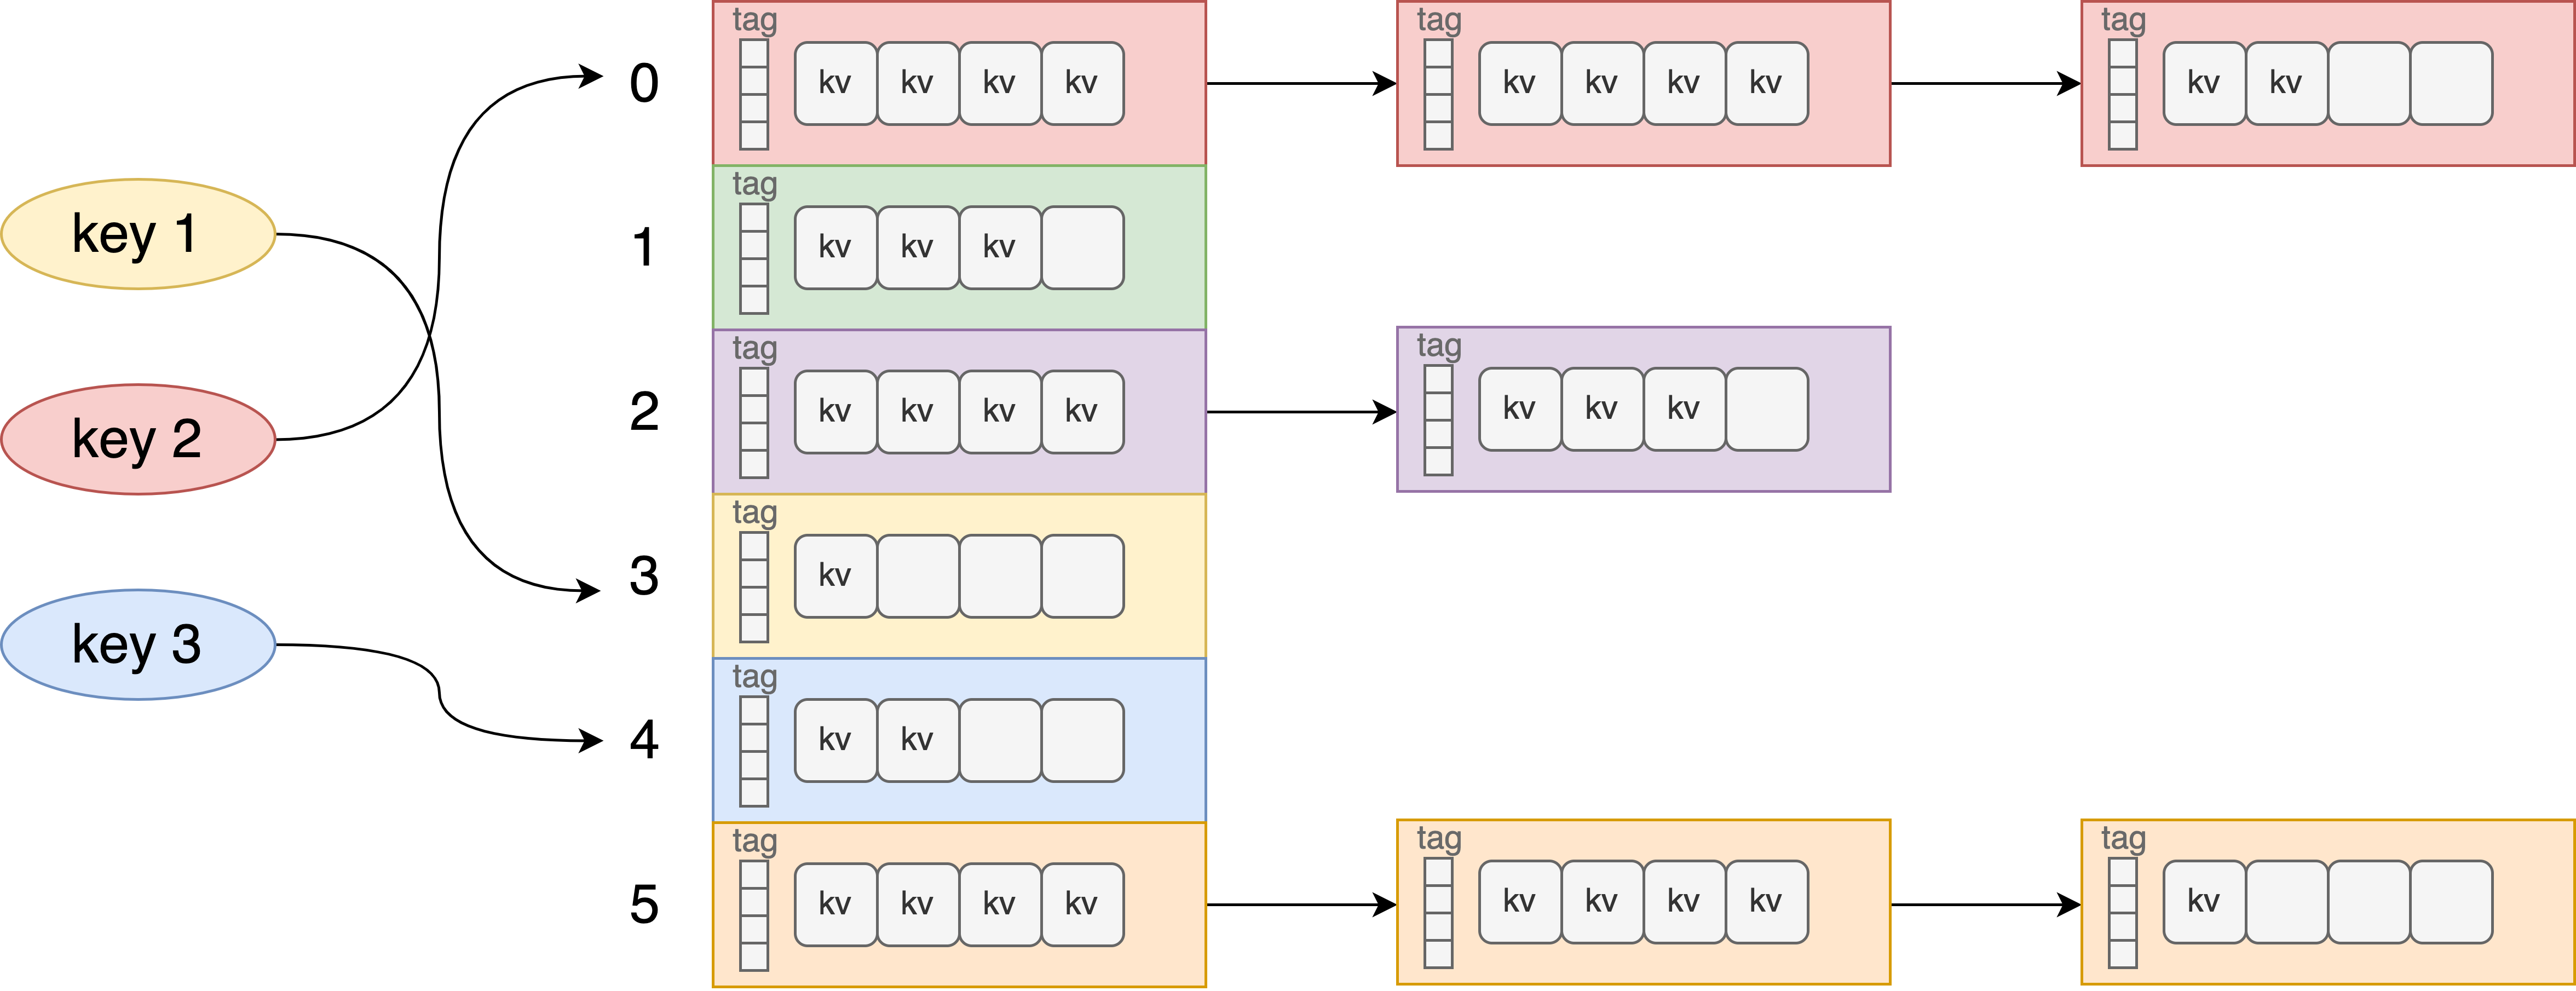 Figure 1. Illustration of the basic structure of the implemented hash table